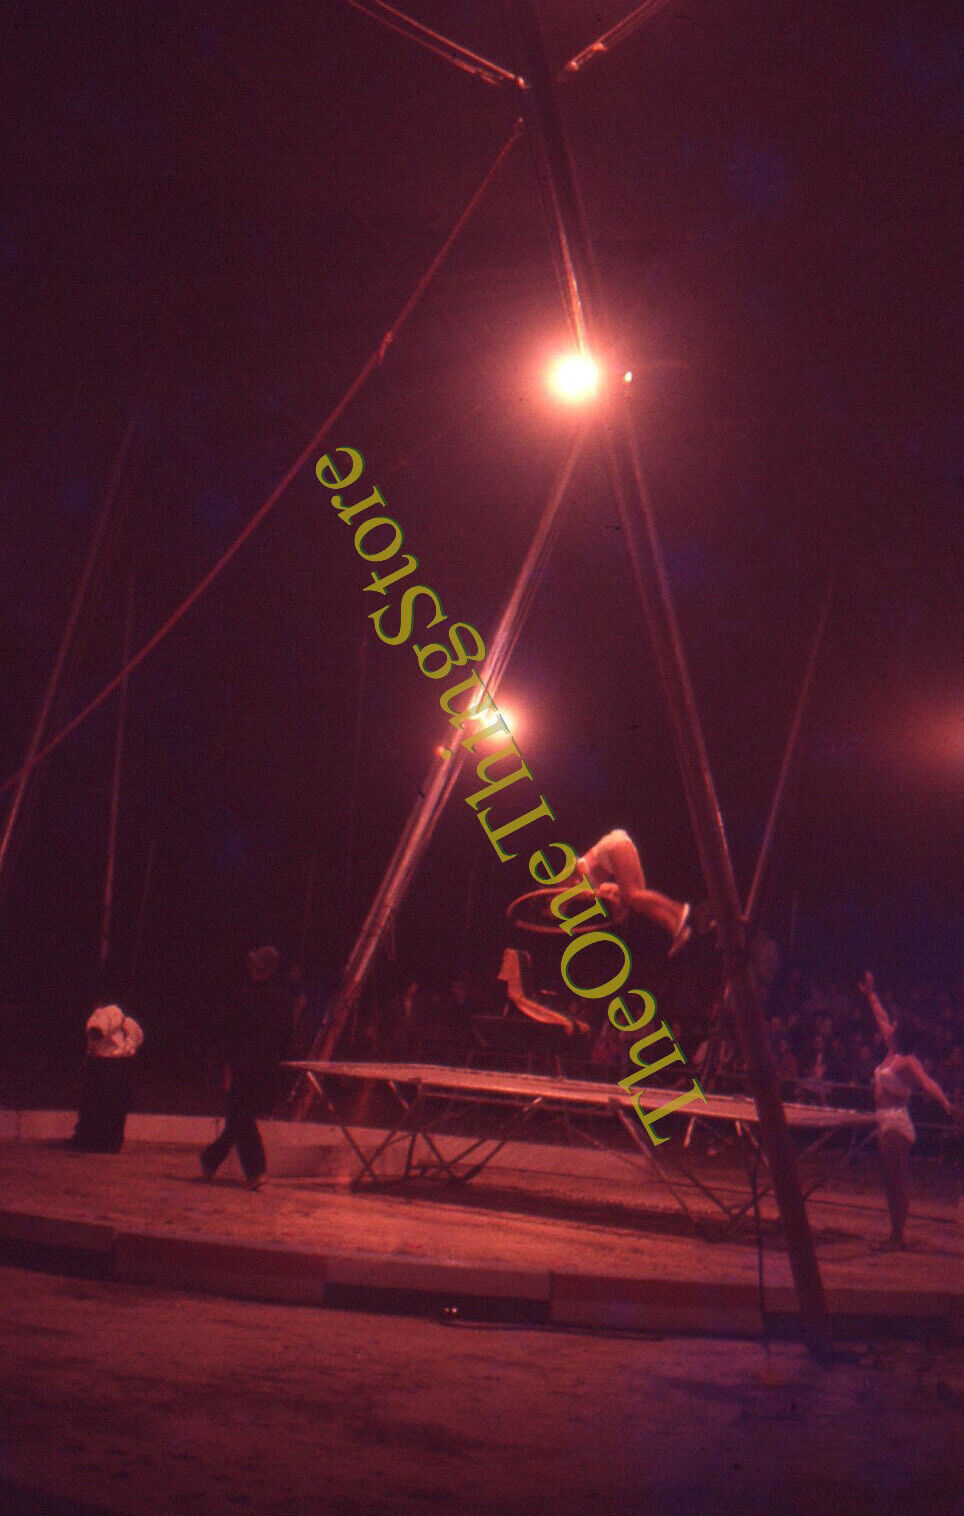 Clyde Beatty Circus Balancing Act Trampoline 1960s 35mm Slide Vtg Tent